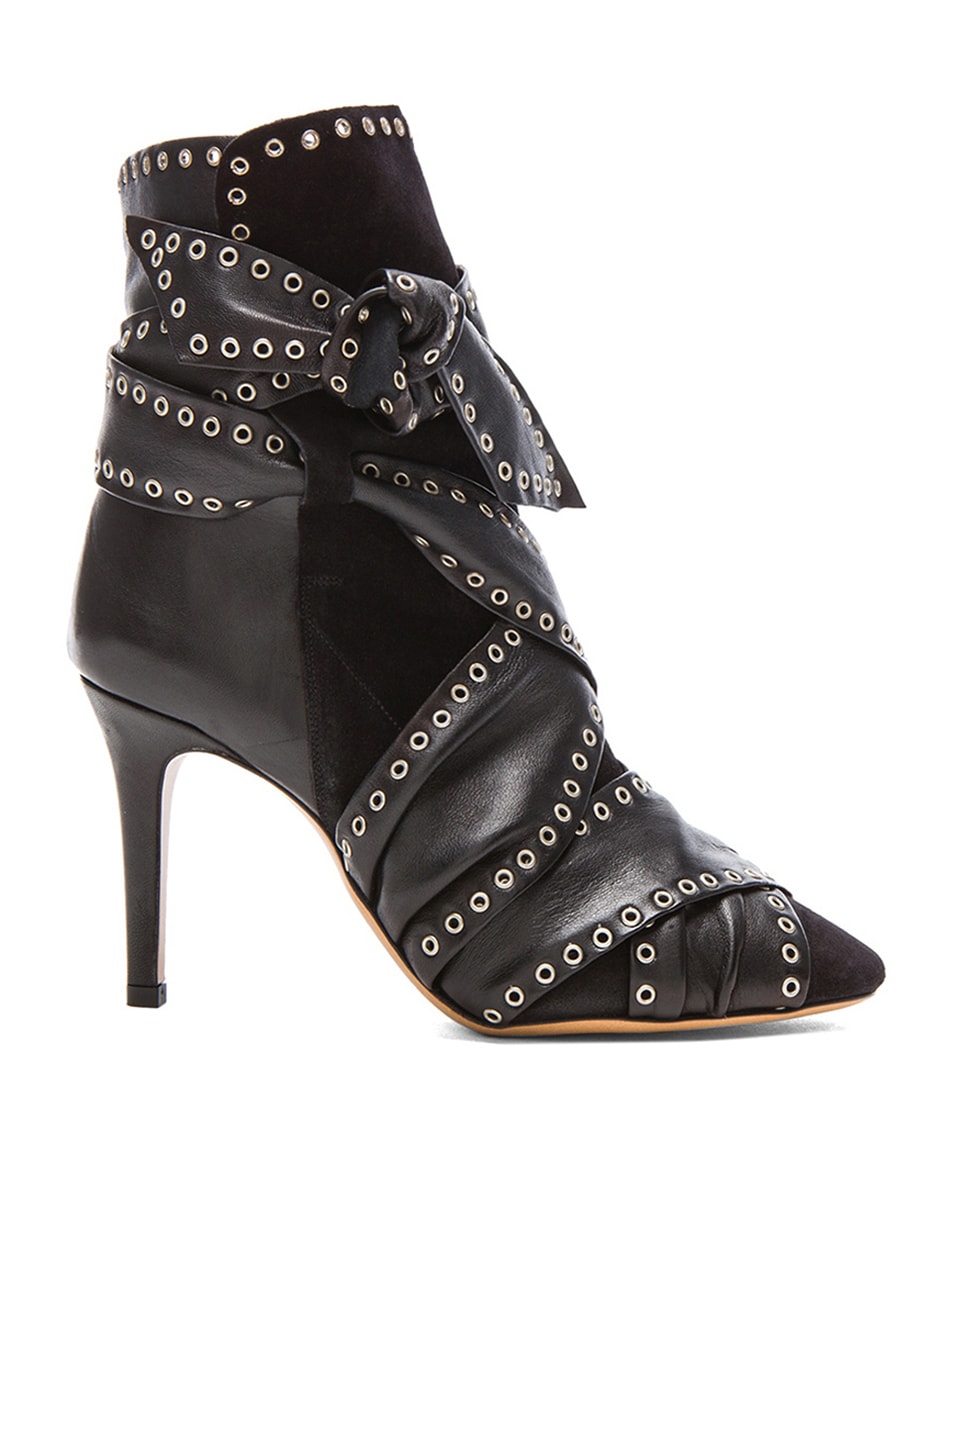 Isabel Marant Alease Studded Booties in Black | FWRD